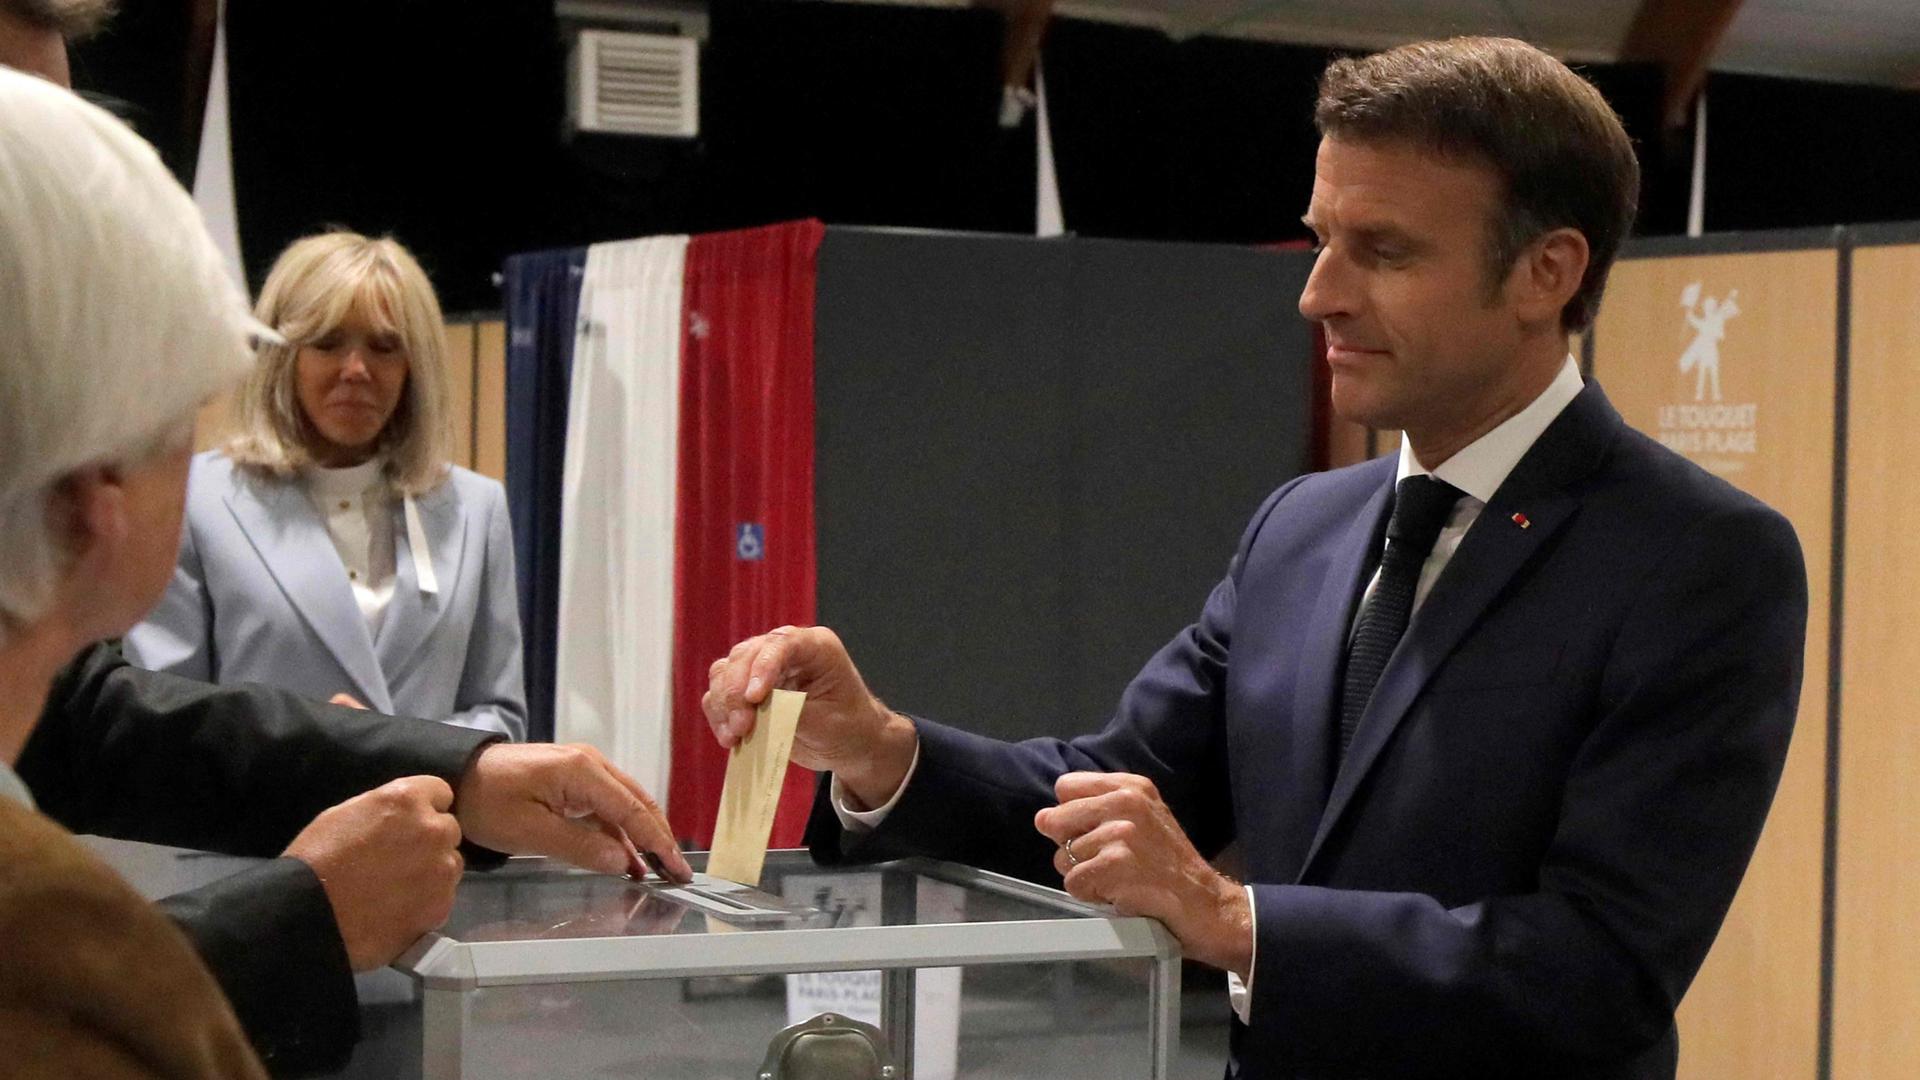 France's President Emmanuel Macron casts his ballot next to his wife Brigitte Macron during the second stage of French parliamentary elections at a polling station in Le Touquet, northern France on June 19, 2022. (Photo by Michel Spingler / POOL / AFP)